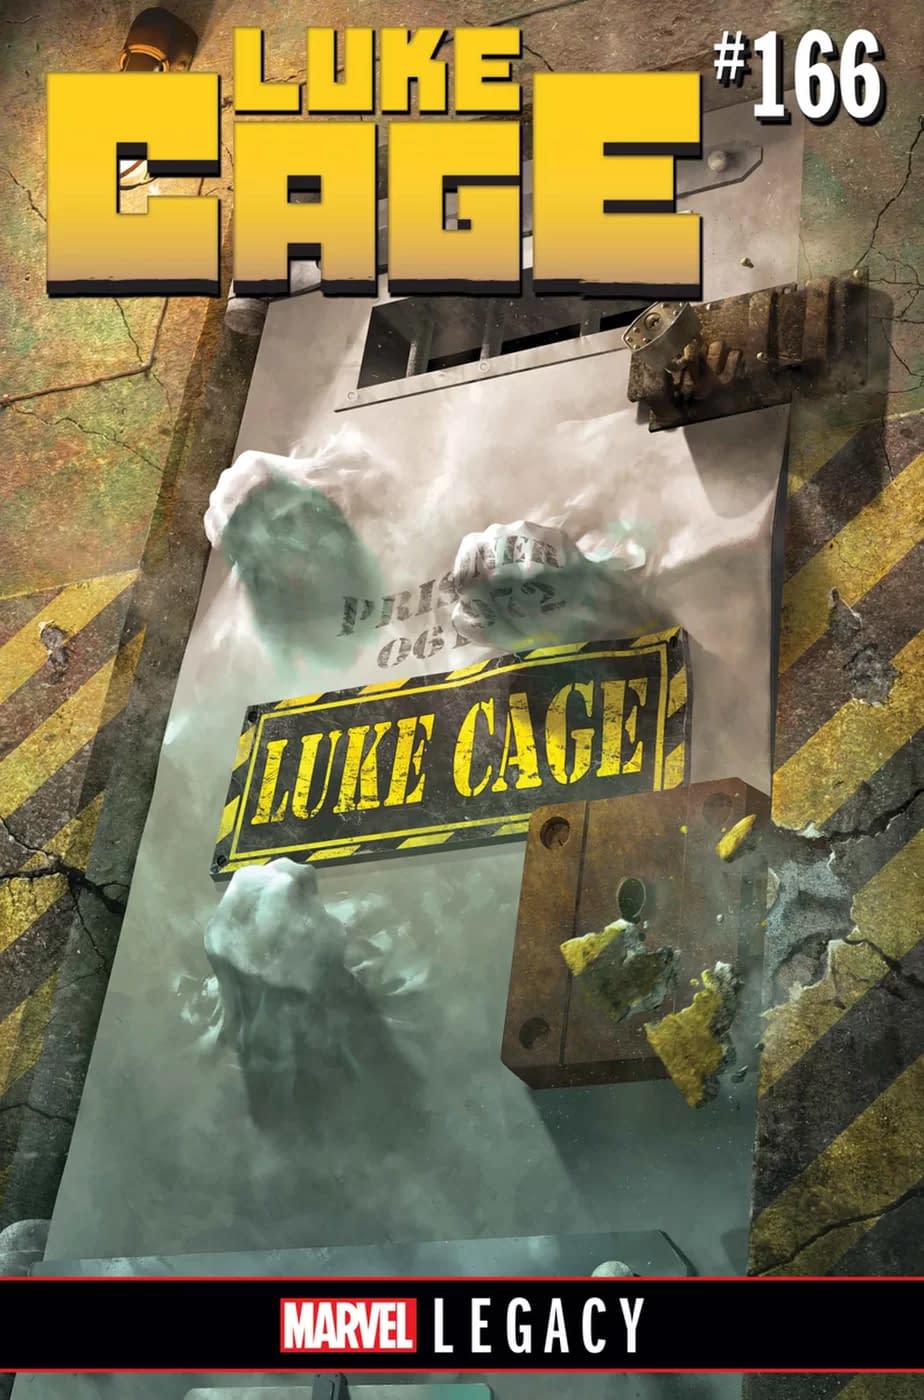 Luke Cage #166 Goes Inside Carl Lucas As David F. Walker Makes First Convincing Case For Marvel Legacy